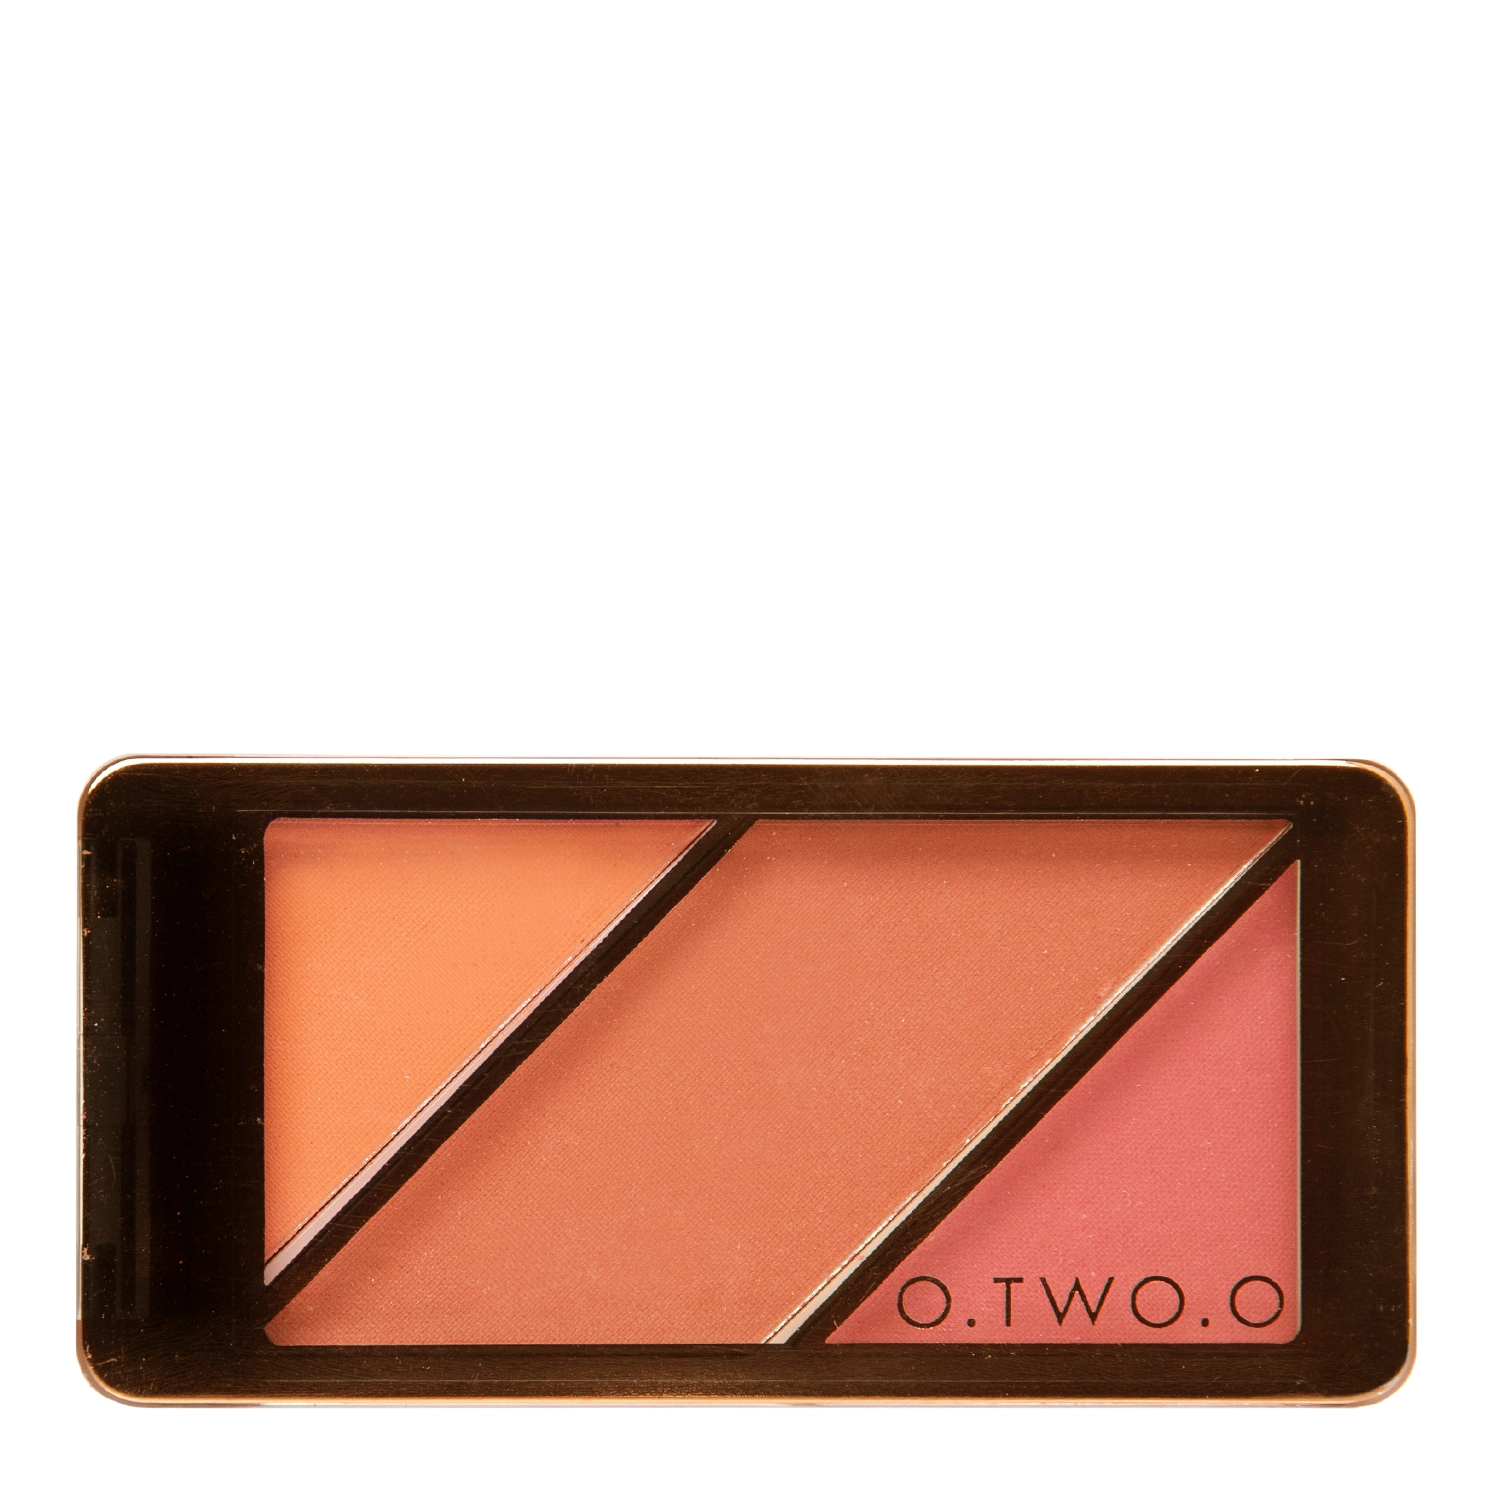 O.TWO.O - 3 in 1 Blusher Highlighter Contour - Набір рум'ян - 01 Pinkish - 10g